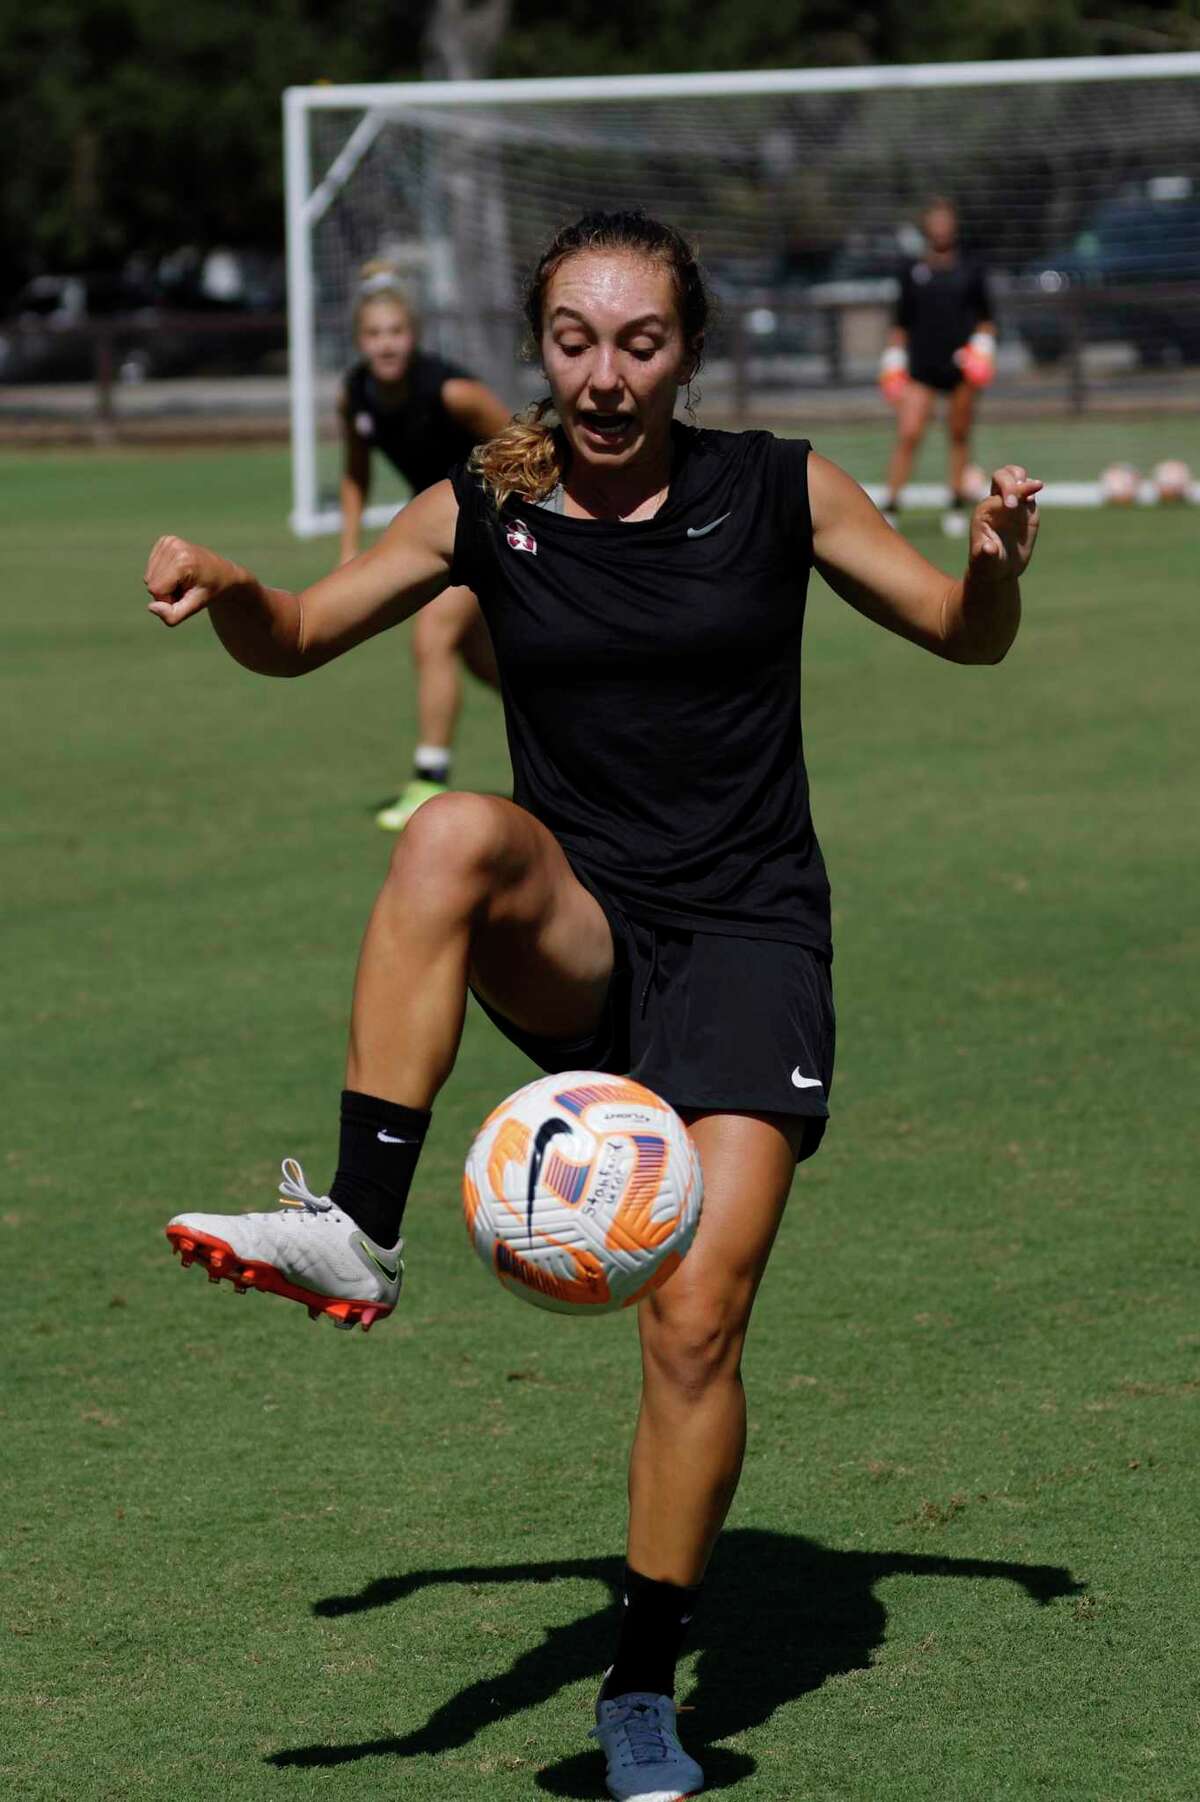 Stanford’s Allie Montoya (3) controls the ball during soccer practice at the Maloney Field on the campus at Stanford, Calif., on Tuesday, August 16, 2022.